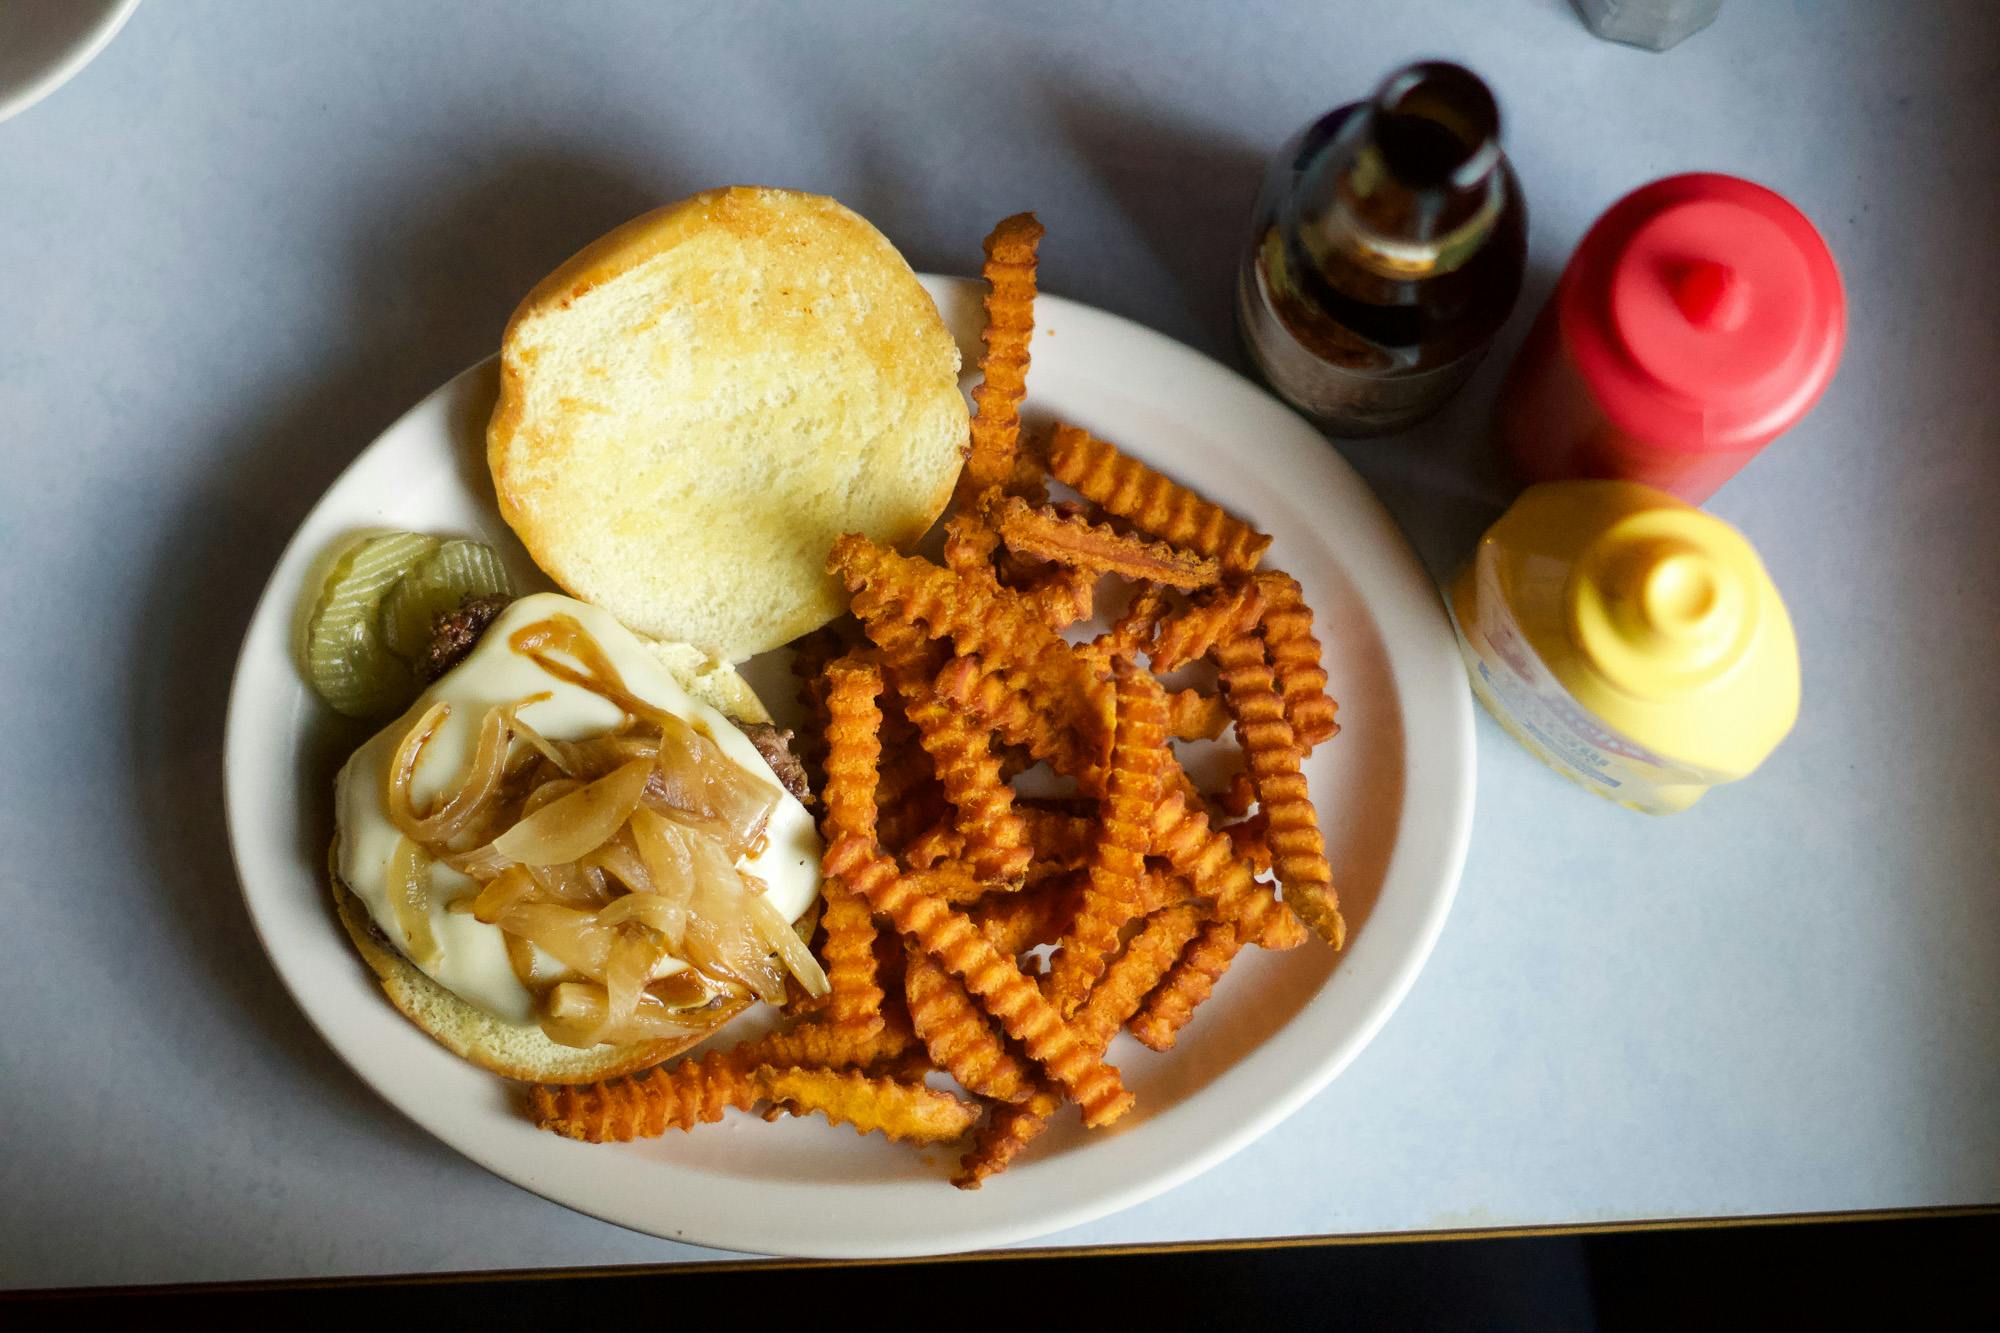 A greasy burger after a ride is the best.